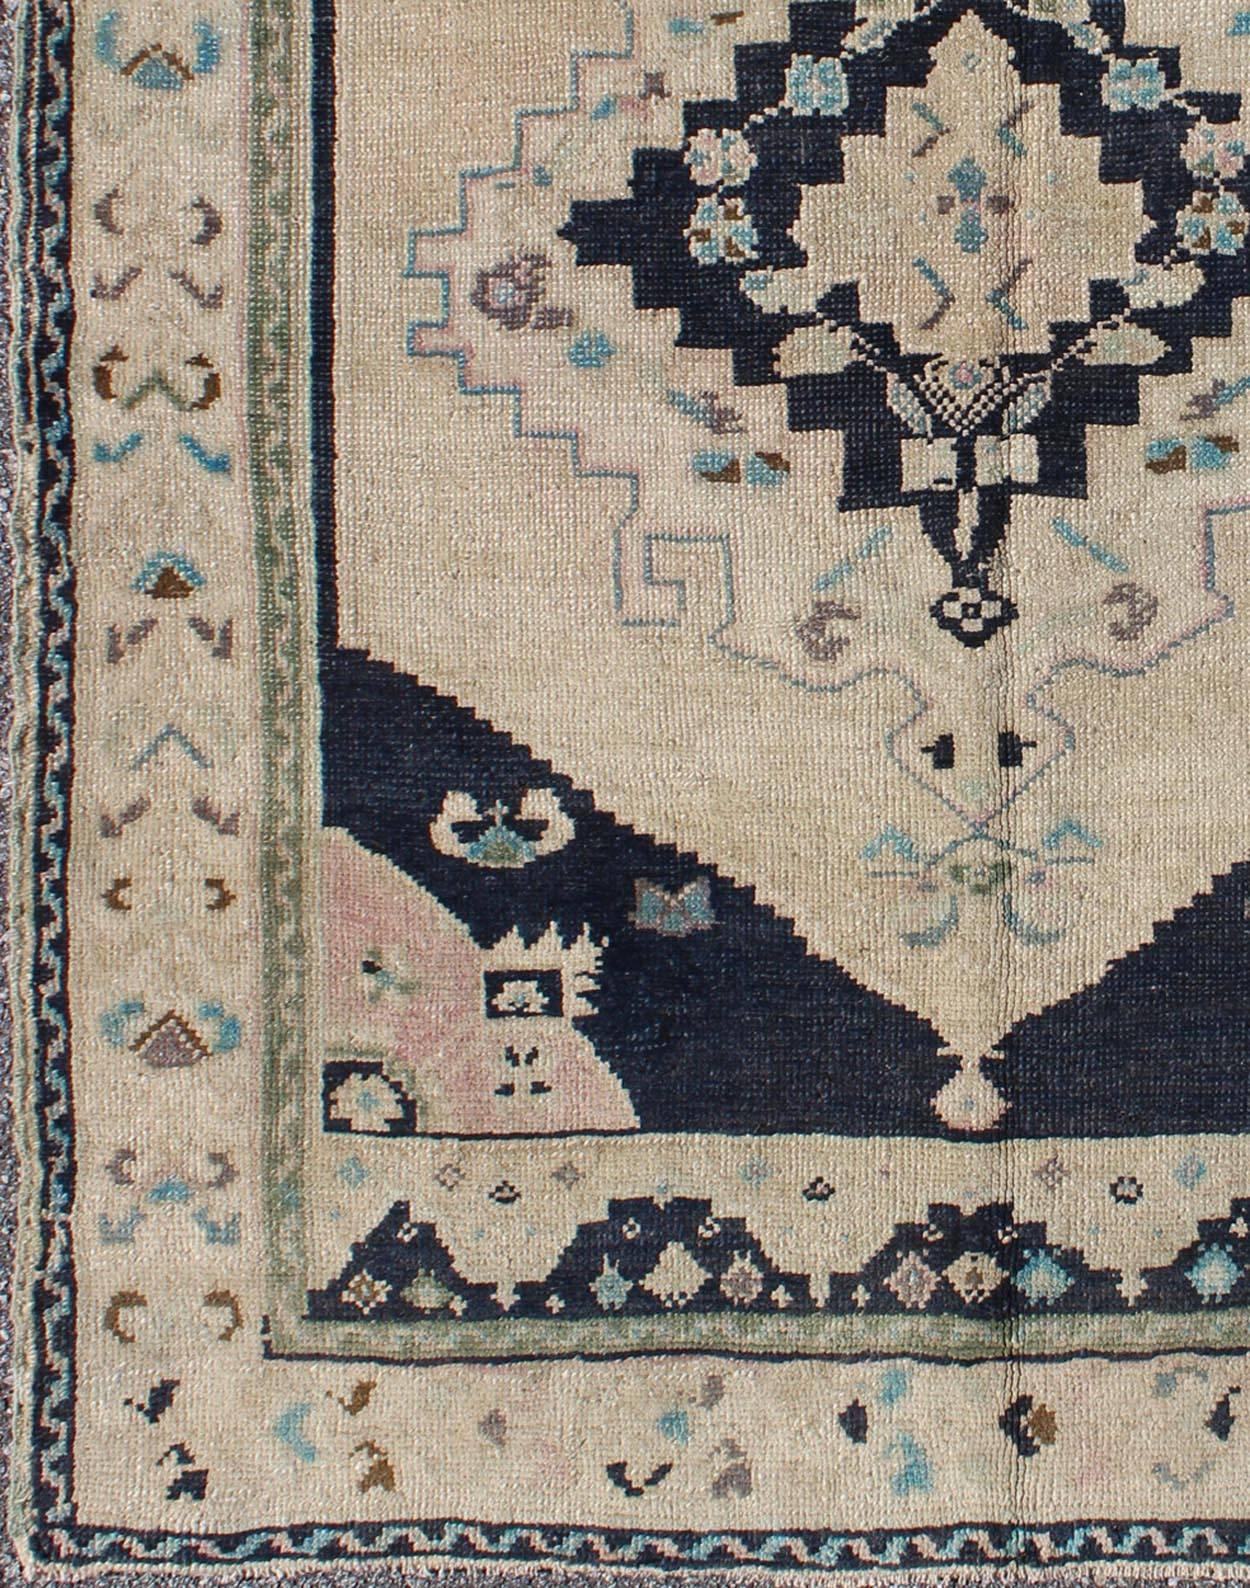 This beautiful rug from mid-20th century Turkey features a medallion with floral motifs surrounding it. The cream ground is home to the center medallion. Four dark blue cornices hold the field with hints of pink. A soft border with floral and leaf